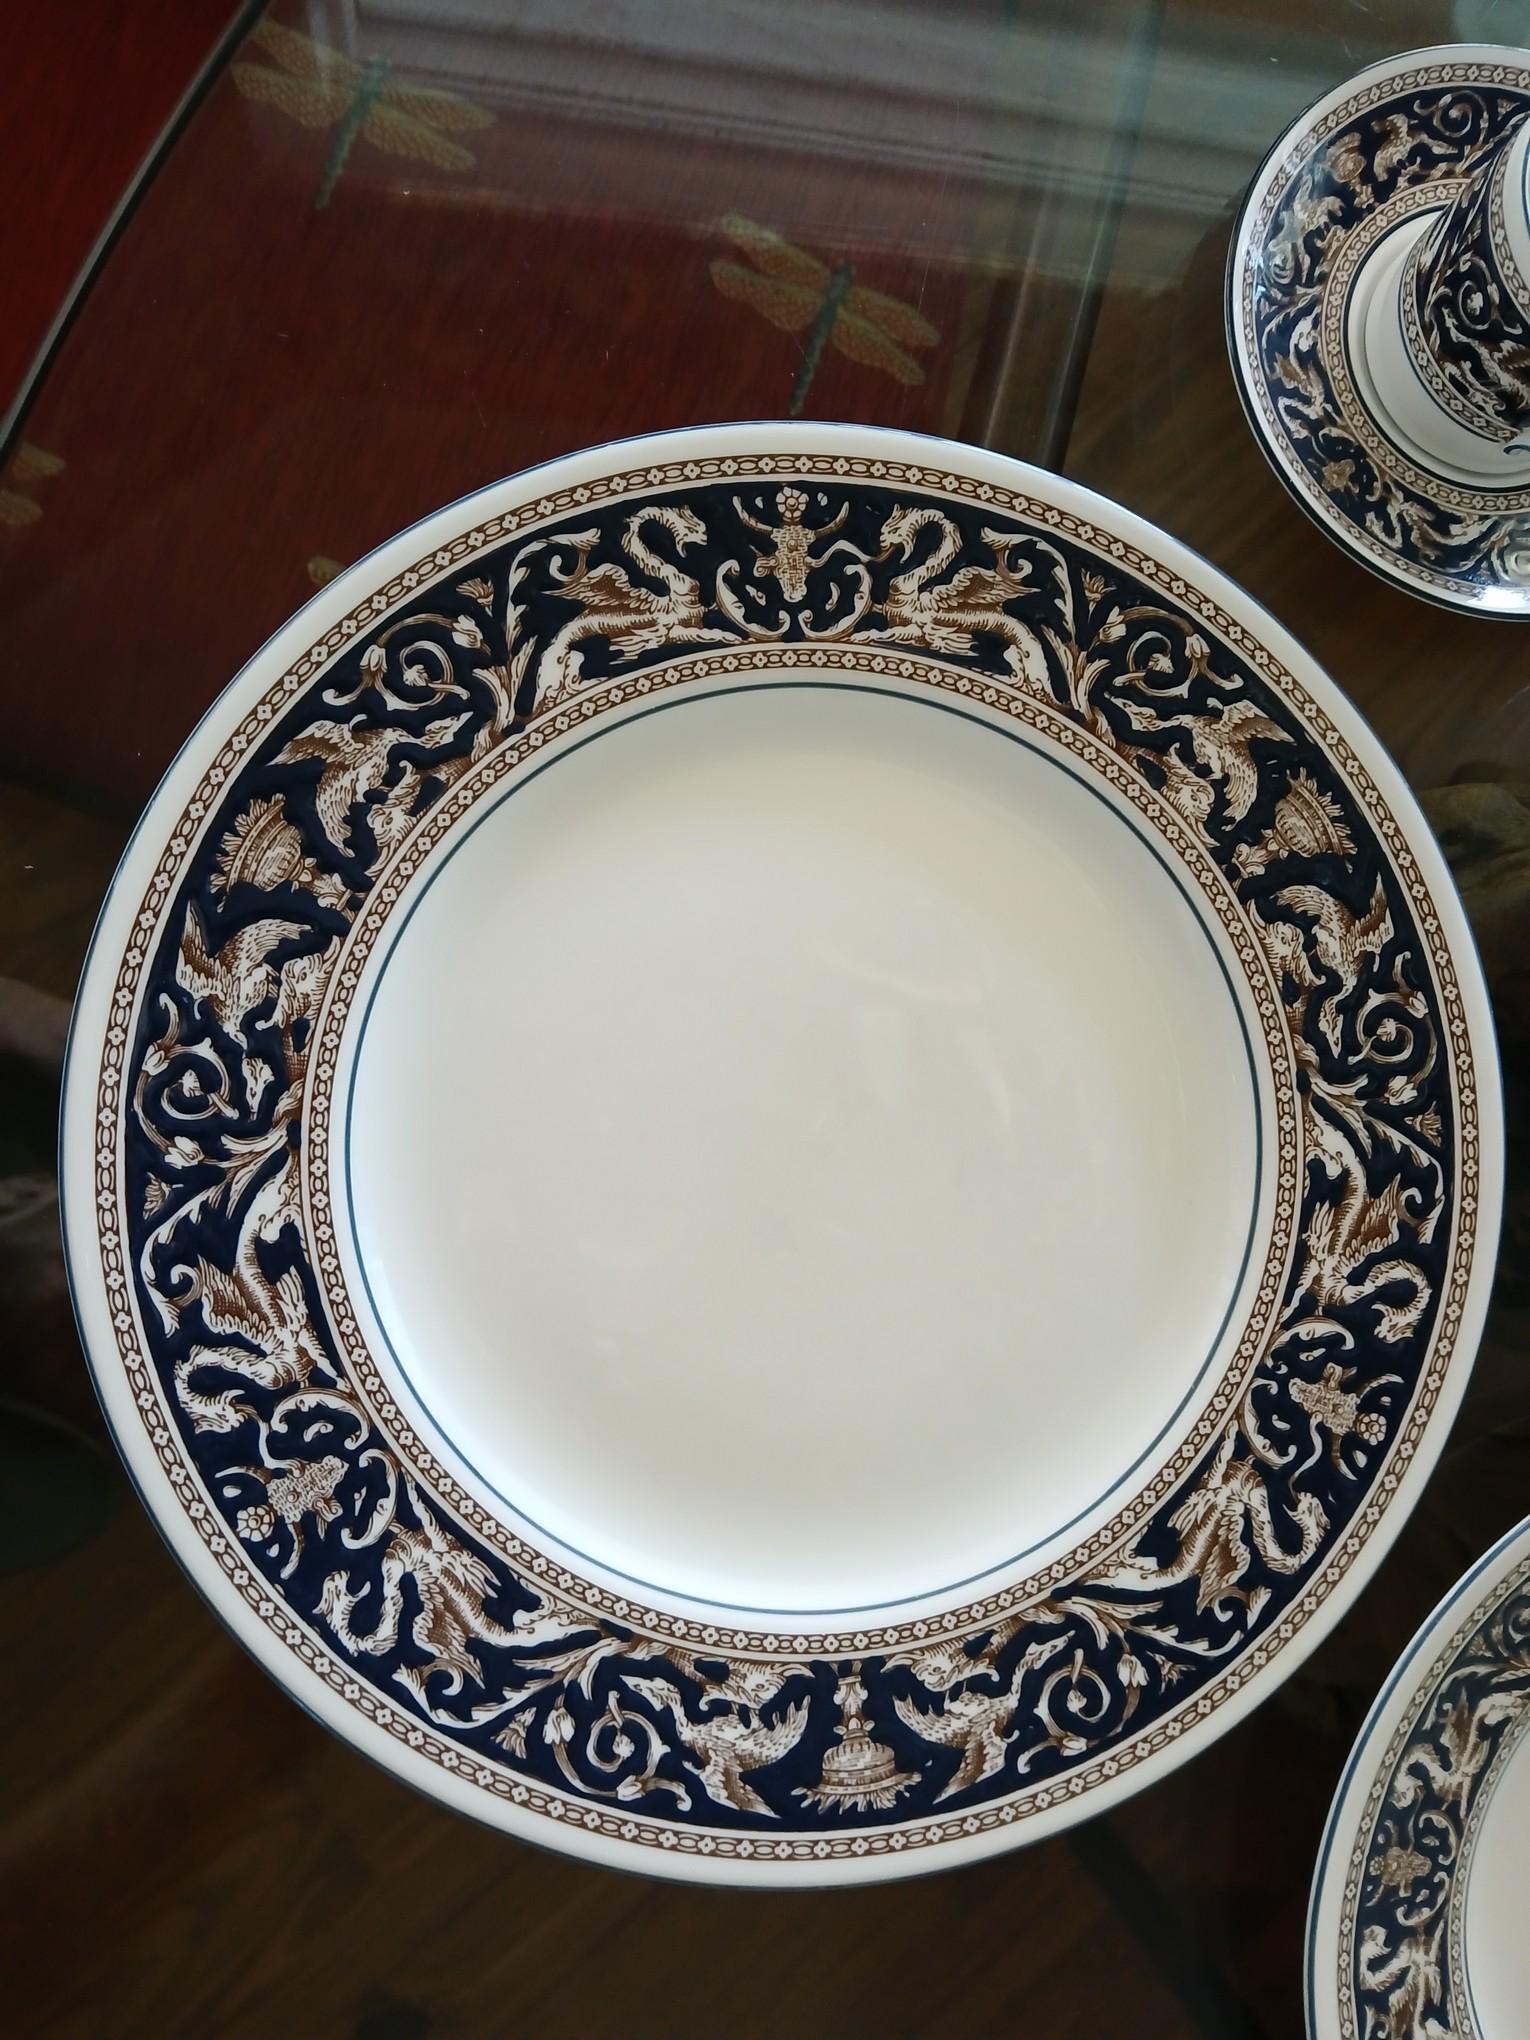 WEDGEWOOD Bone China Complete Plate Set / Made in England / Florentine Patters W1956